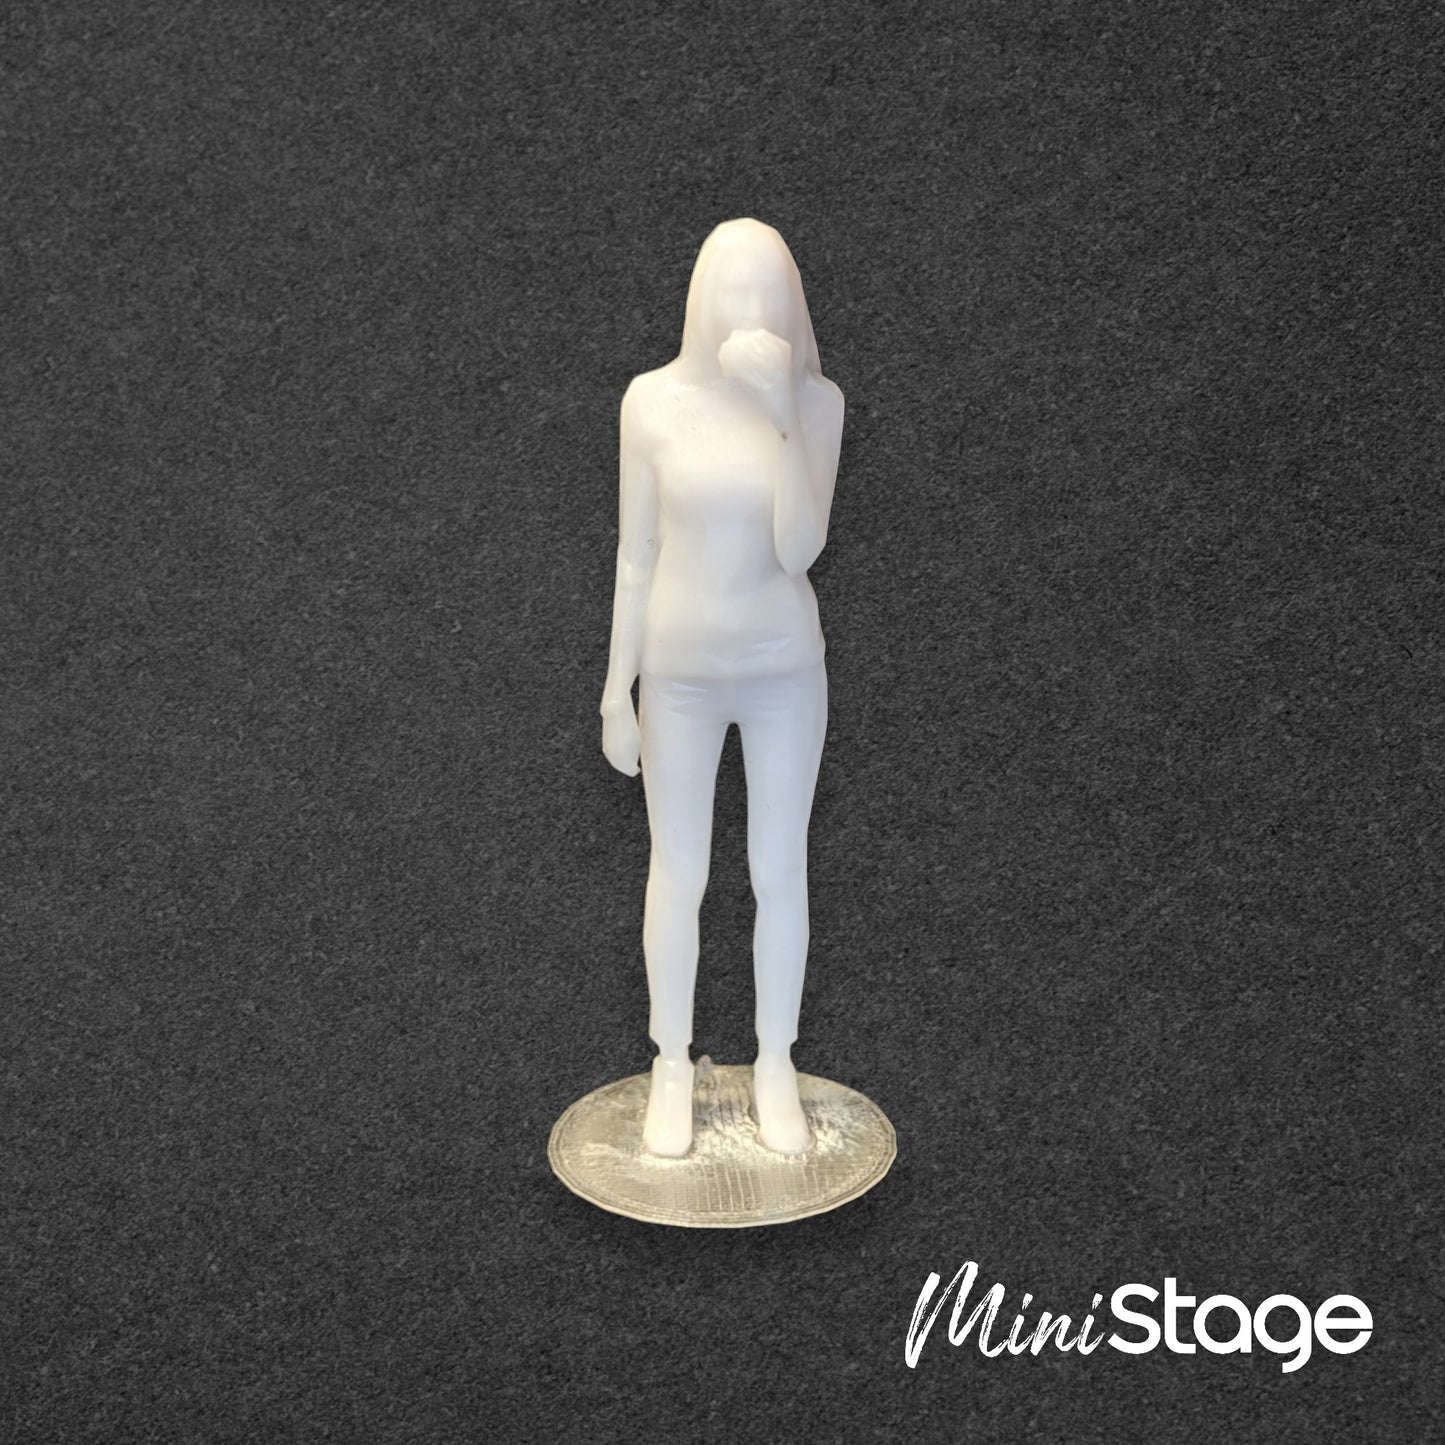 Amelia - Scale Model Box Unpainted Figure of Woman Standing and Eating